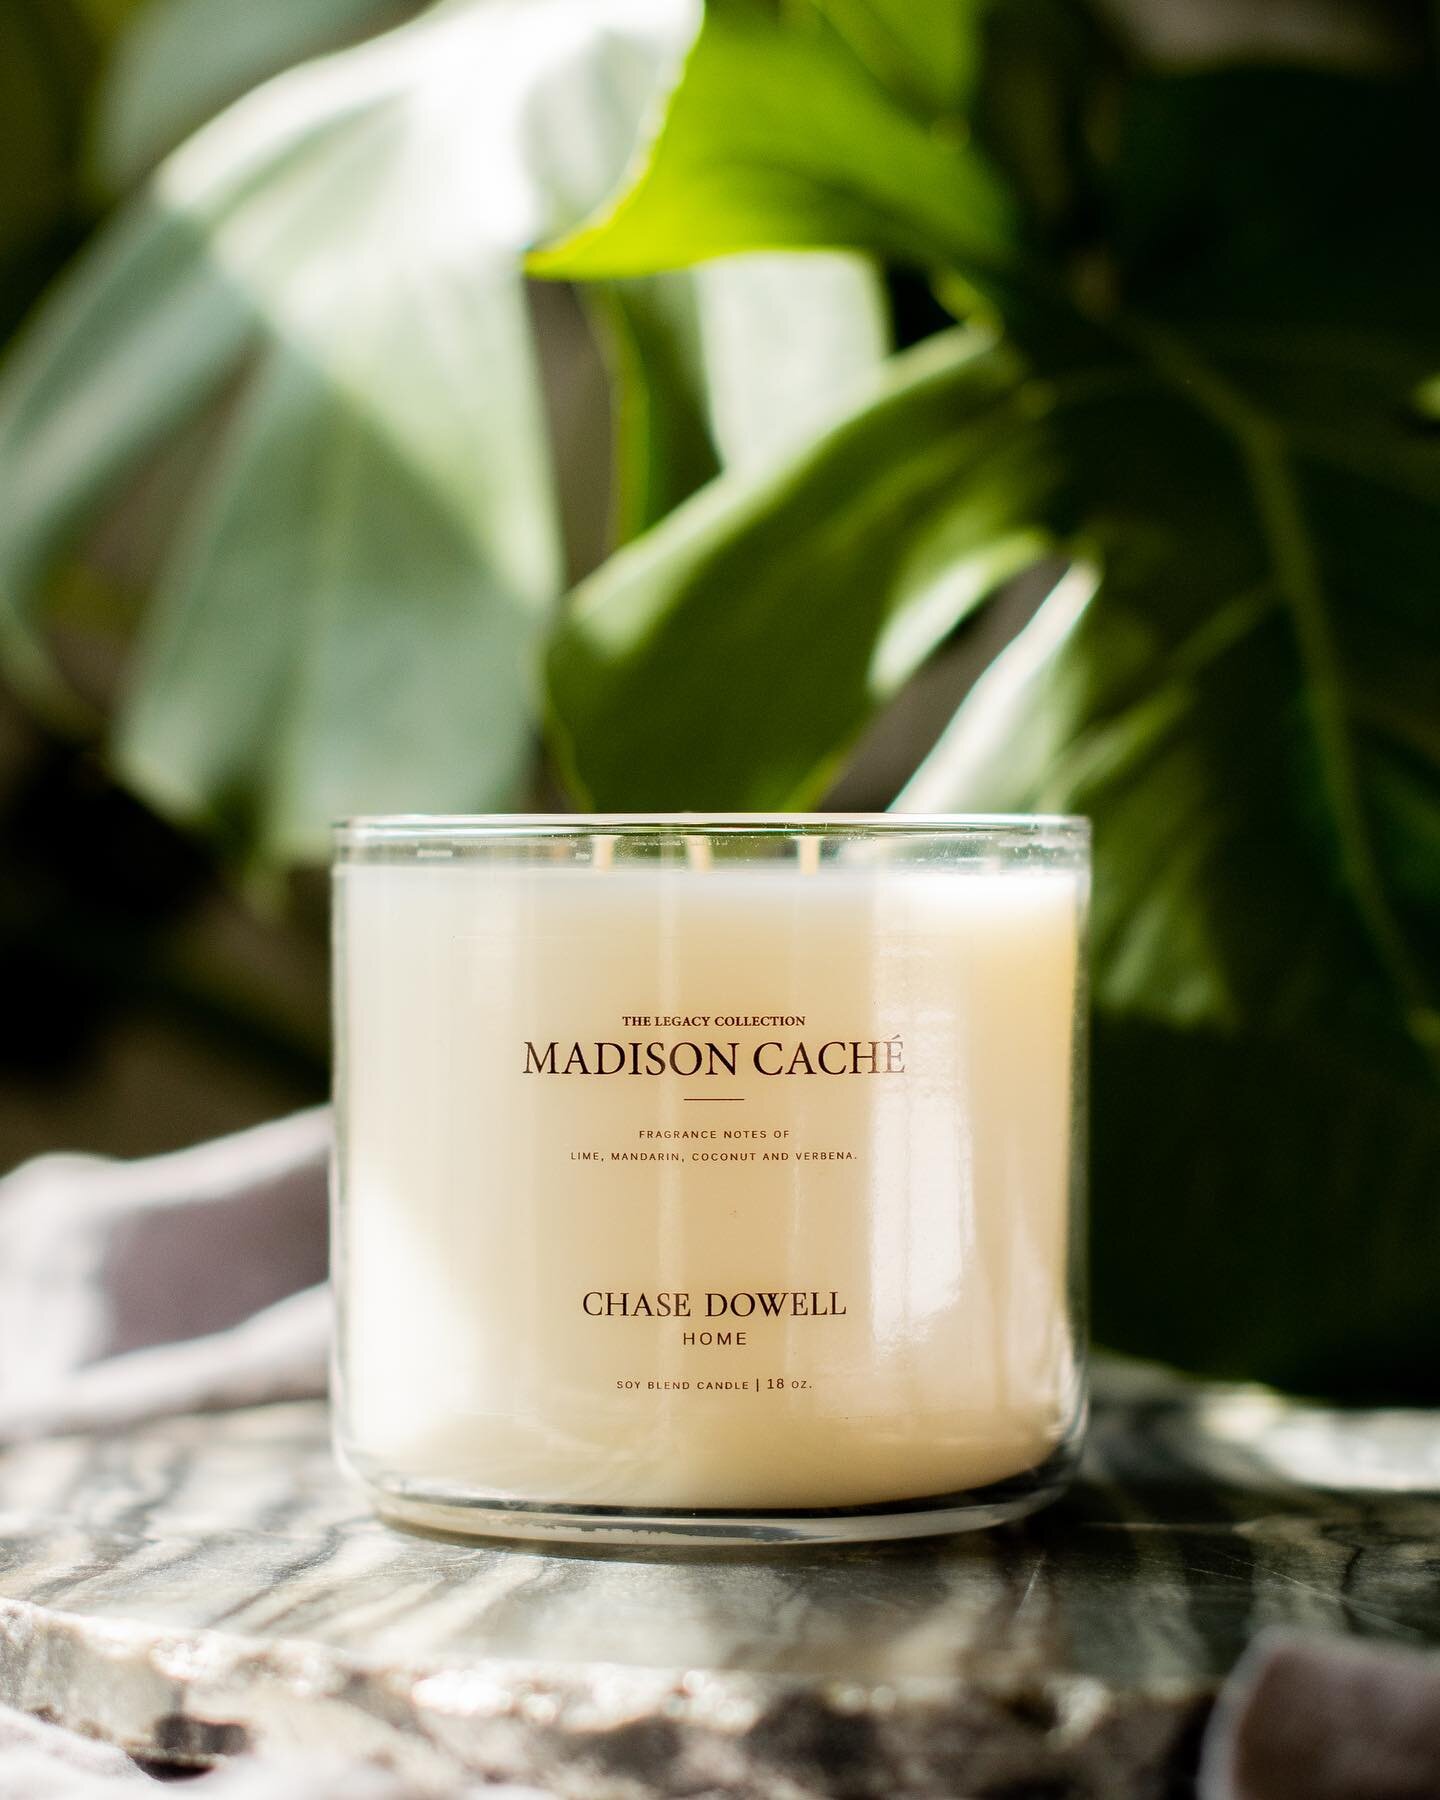 Now Available!
chasedowell.com/shop
#CDHome
#ChaseDowell #BeTheBeauty
@chasedowellhome 

.
.
.
#candles #homefragrance #luxury #home #dreamhome #homedecor #interiordesign #interiordesigner #houstoninteriordesigner #renovation #dallas #houston #furnit